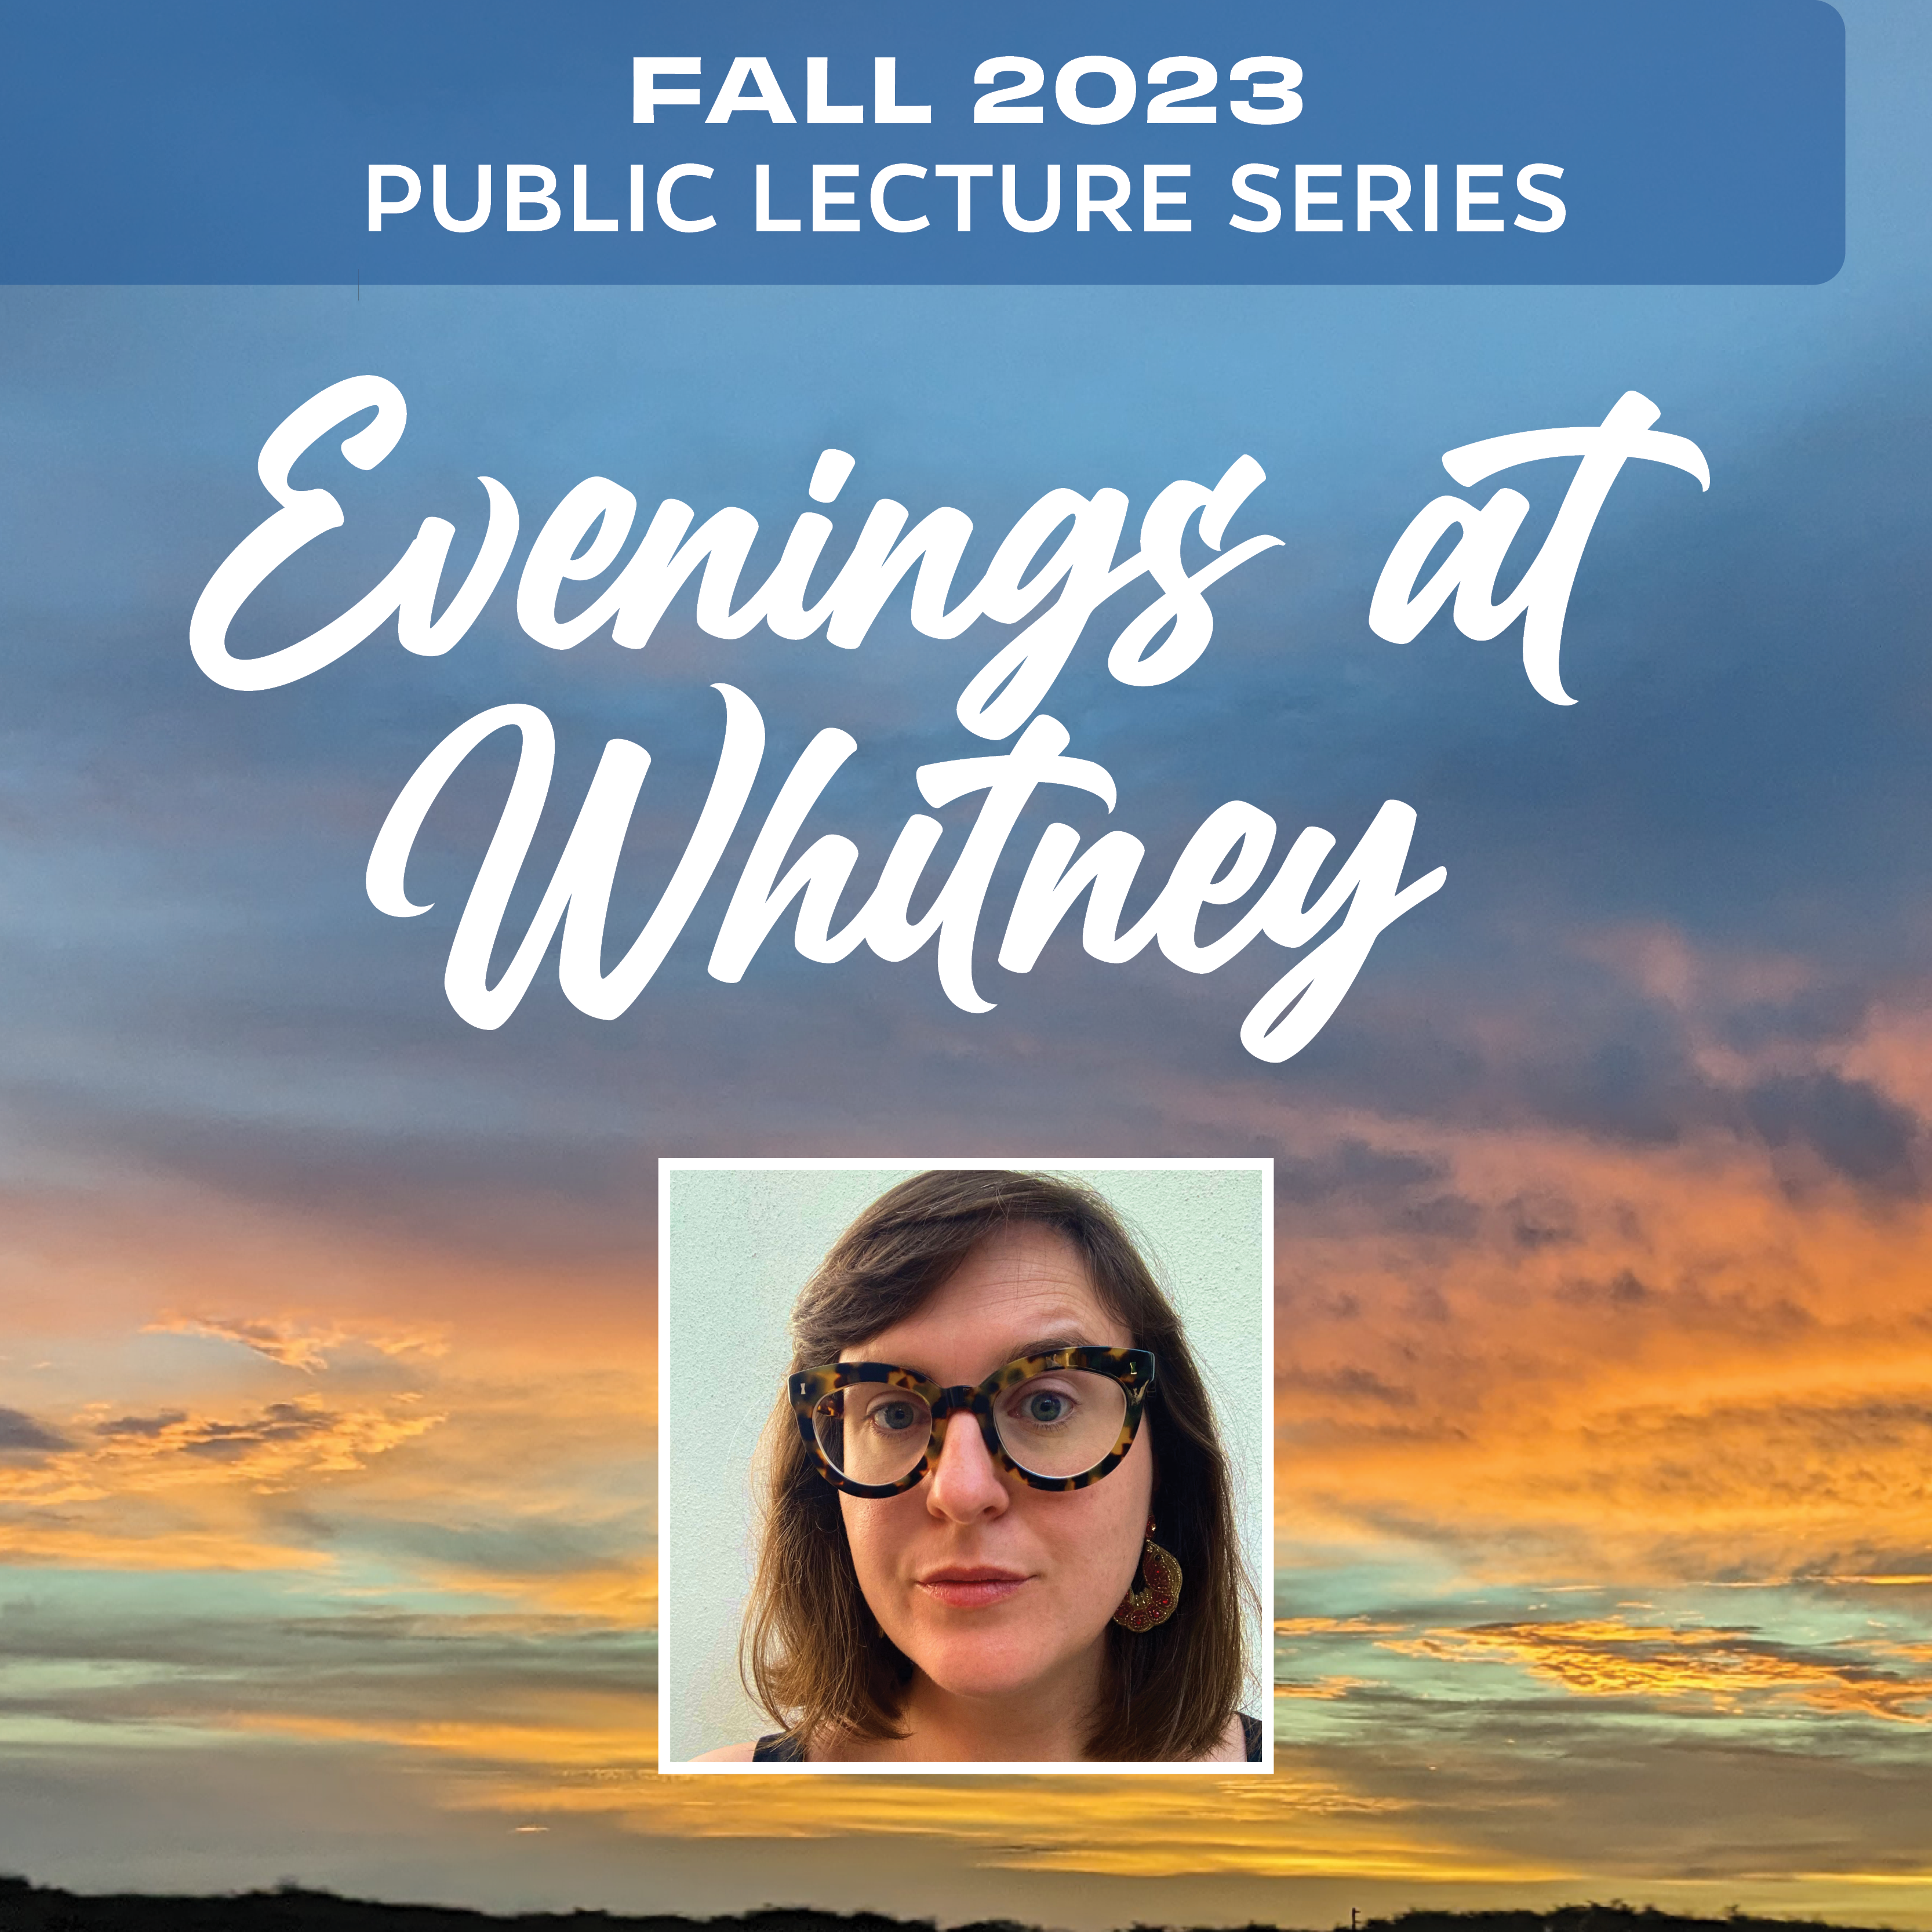 Evenings at Whitney October 12